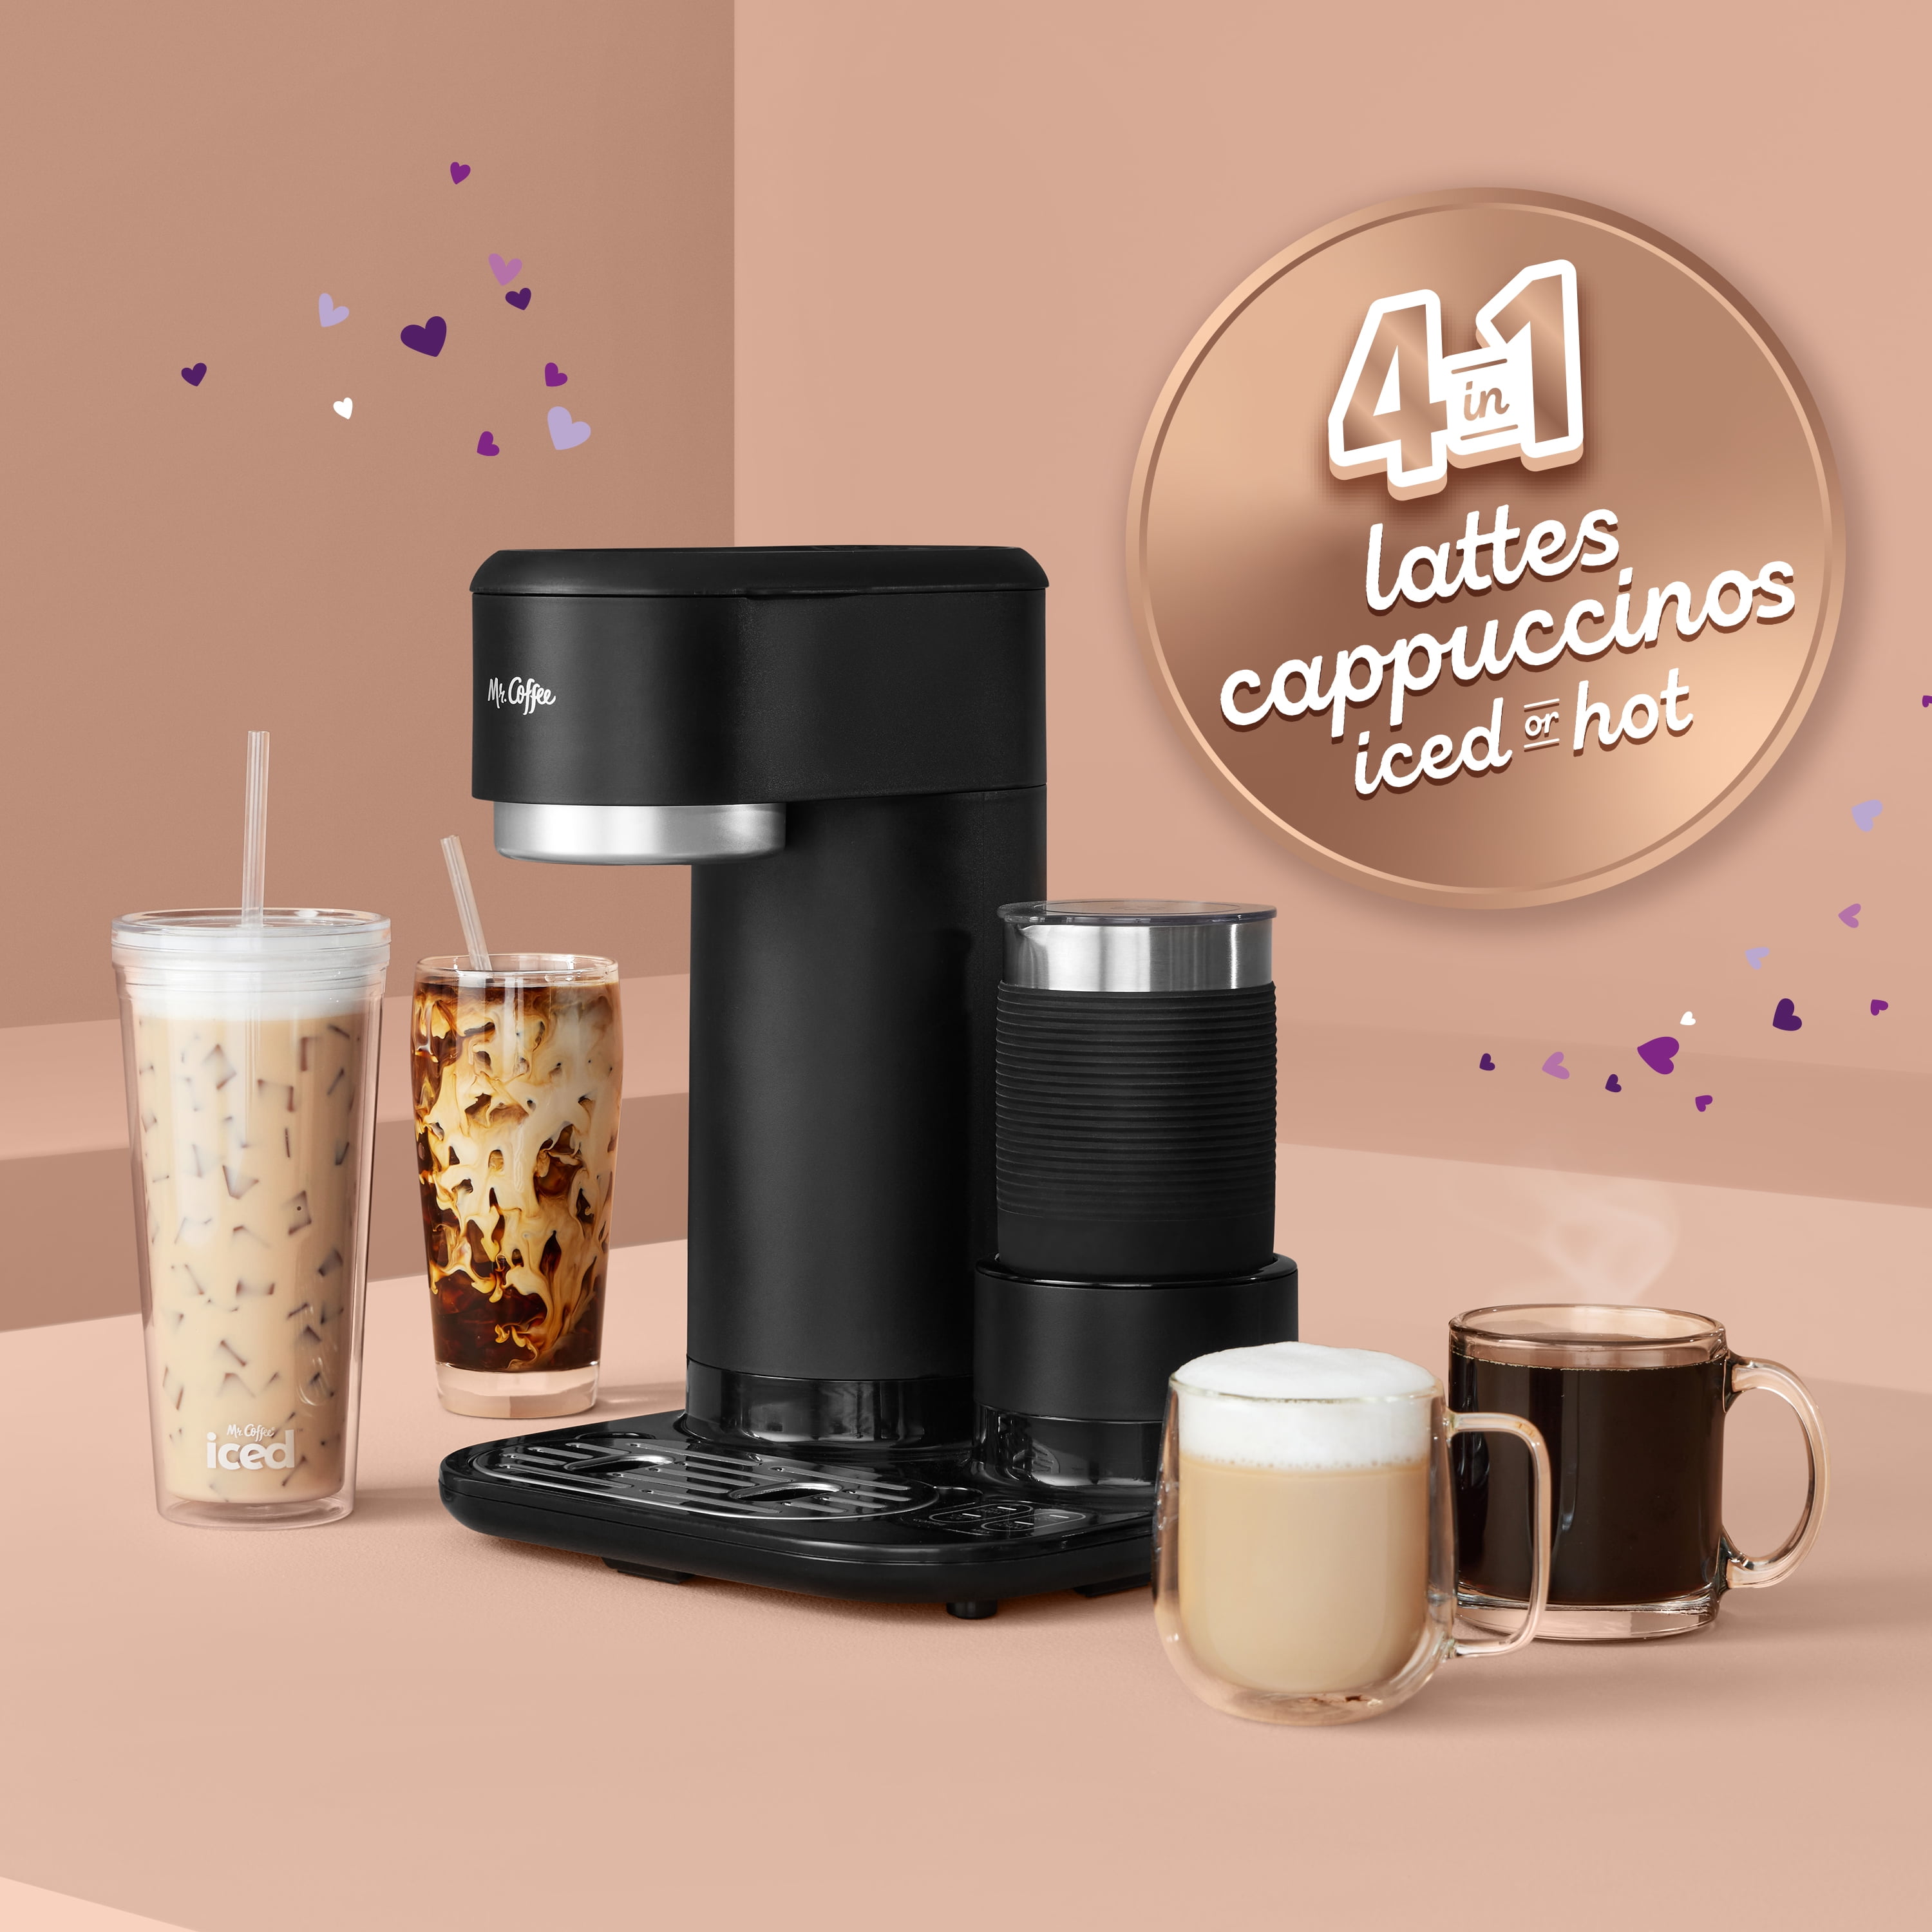 Mr. Coffee 4-in1 Single-Serve Latte, Iced, and Hot Coffee Maker, Black